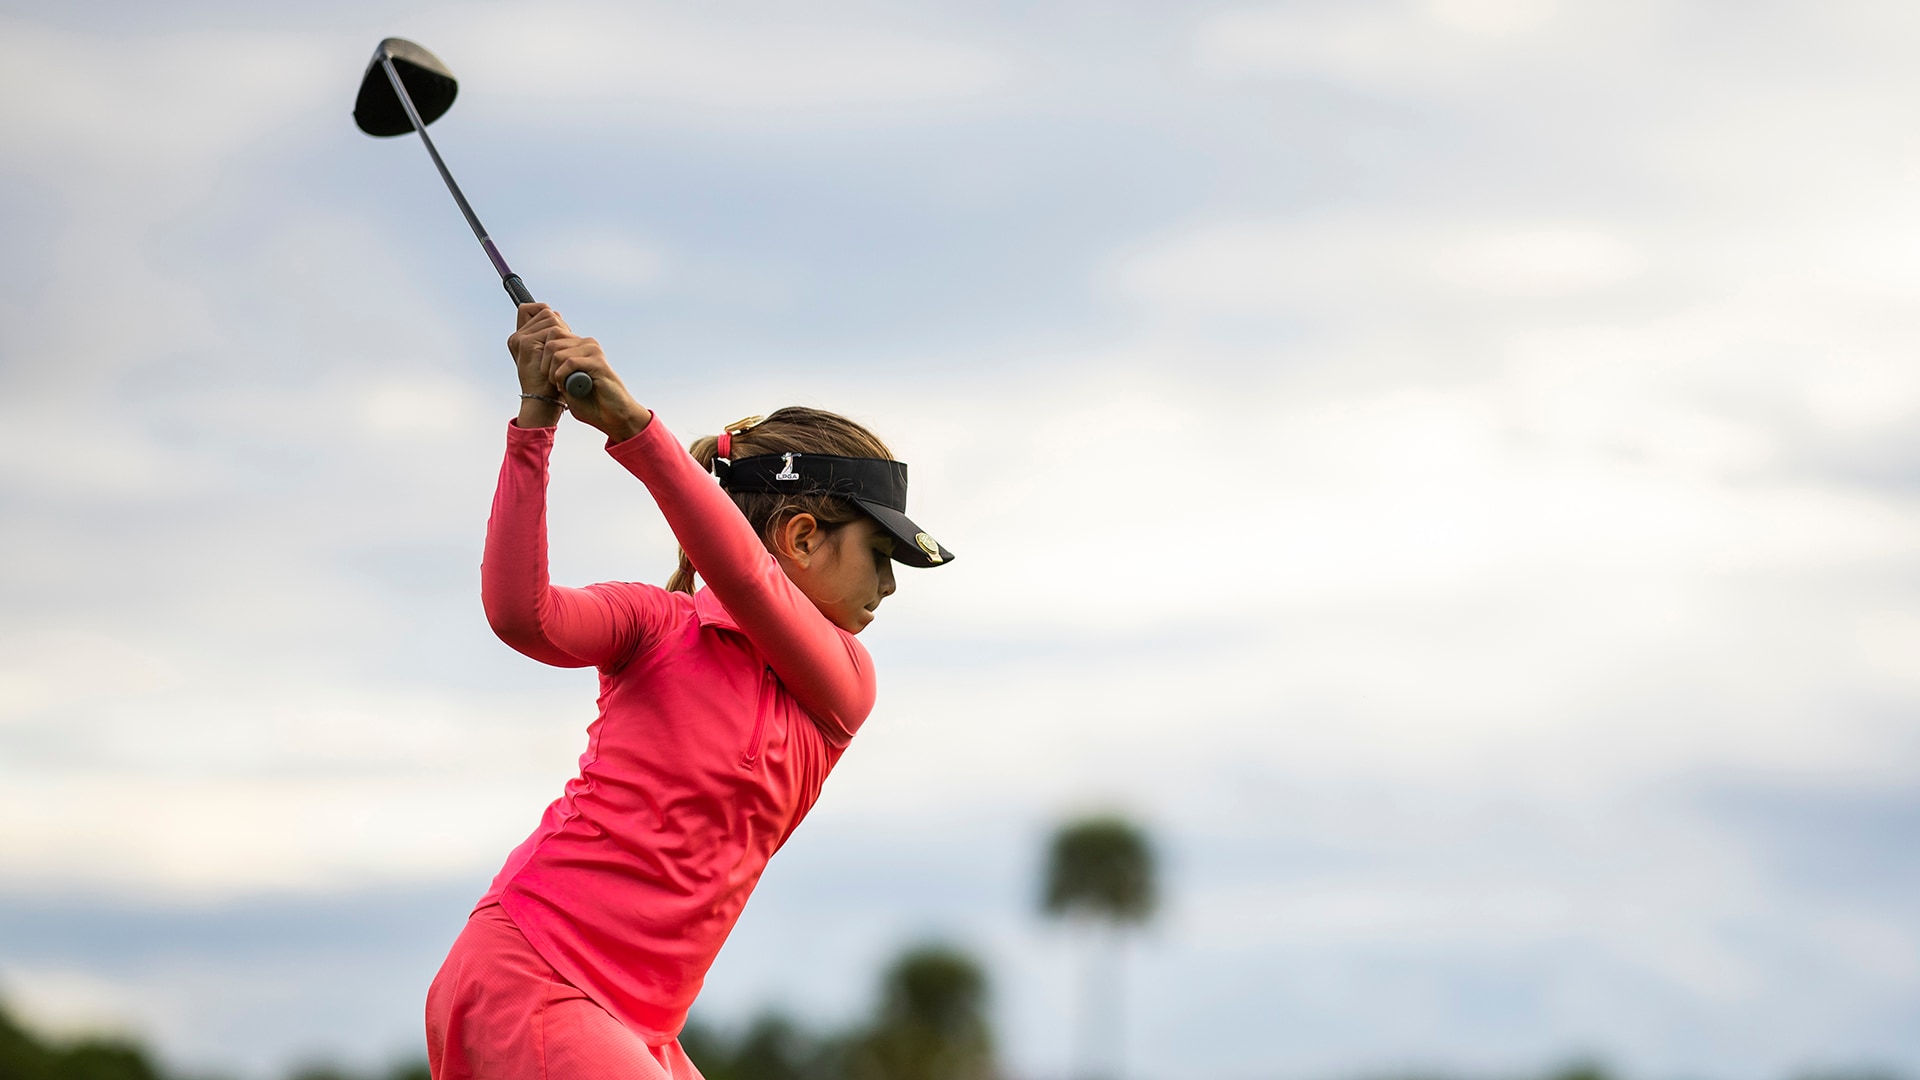 A 9-year-old is attempting to qualify for the U.S. Women’s Open